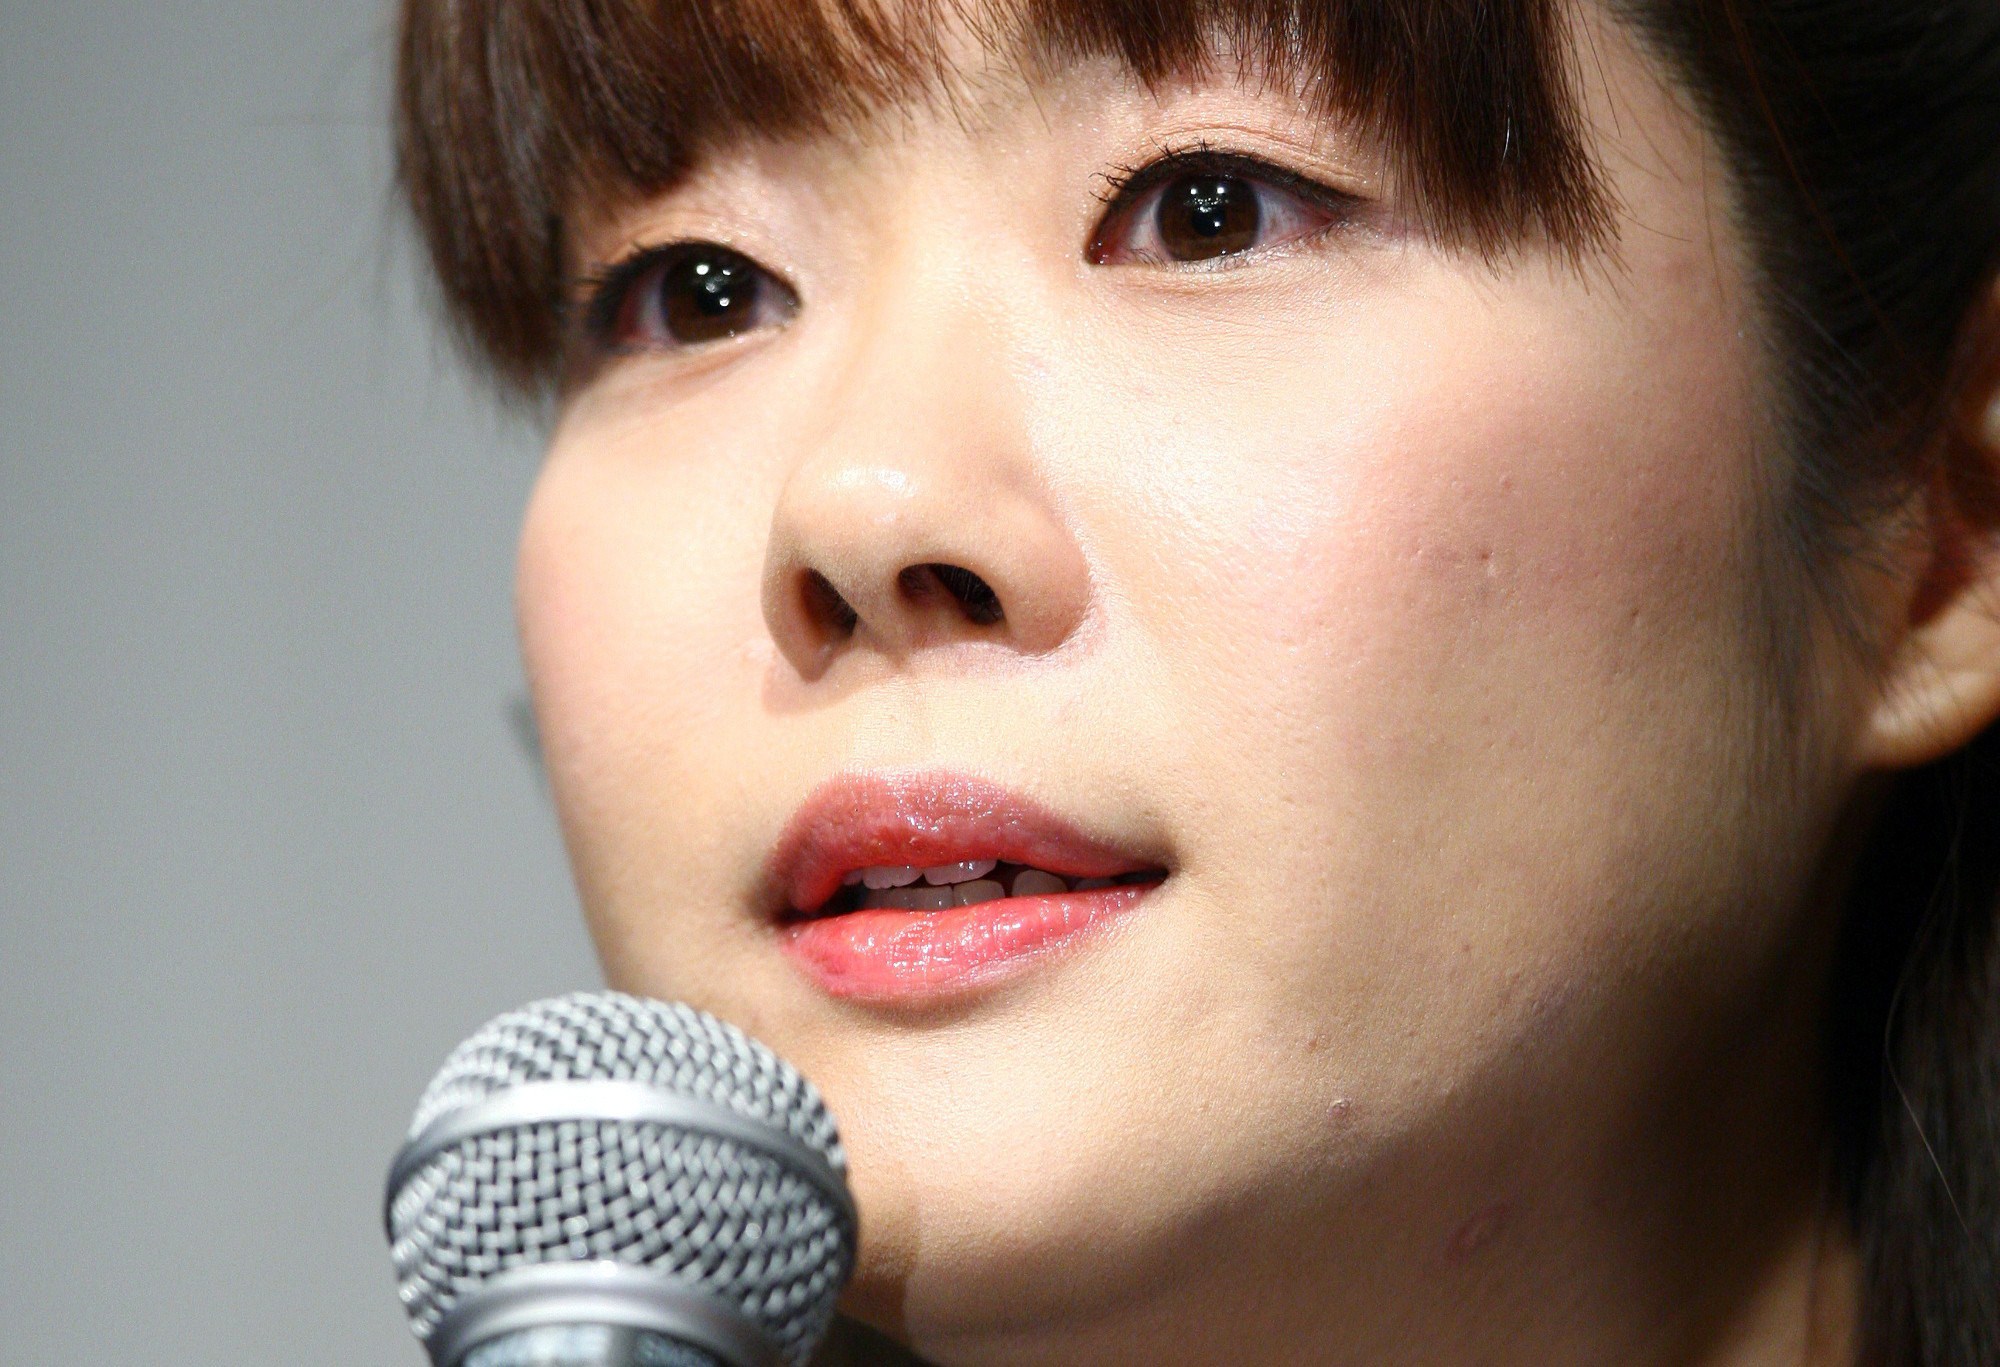 Haruko Obokata, 30, of Japan's Riken Institute speaks at a press conference on April 9, 2014, following claims that her groundbreaking stem-cell study was fabricated.